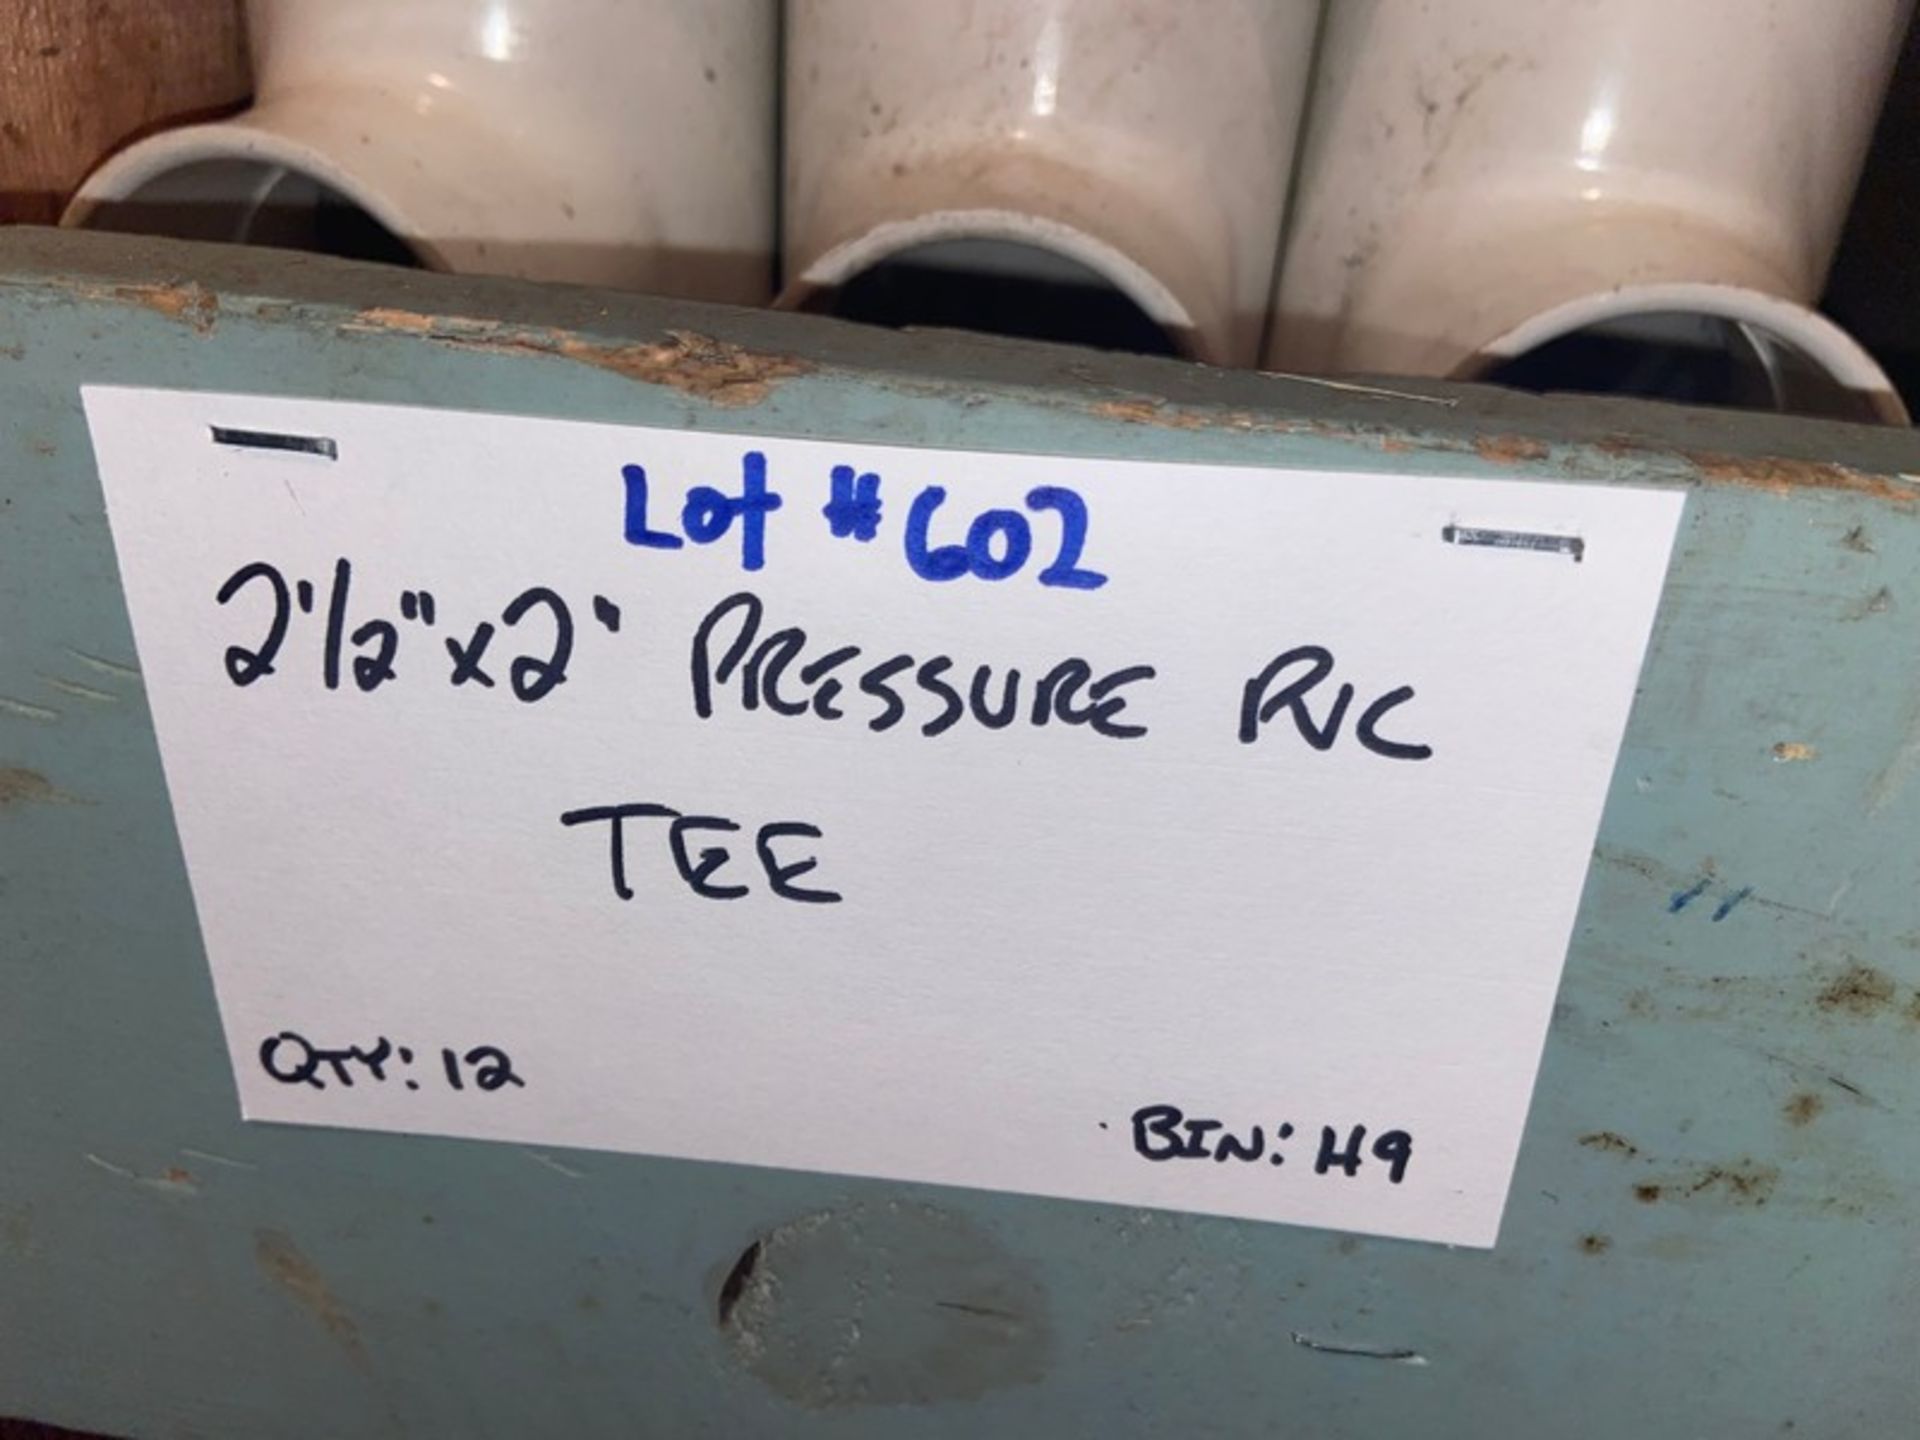 (12) 2 1/2”x 2 Pressure PVC TEE (Bin:H9)(LOCATED IN MONROEVILLE, PA) - Image 3 of 4